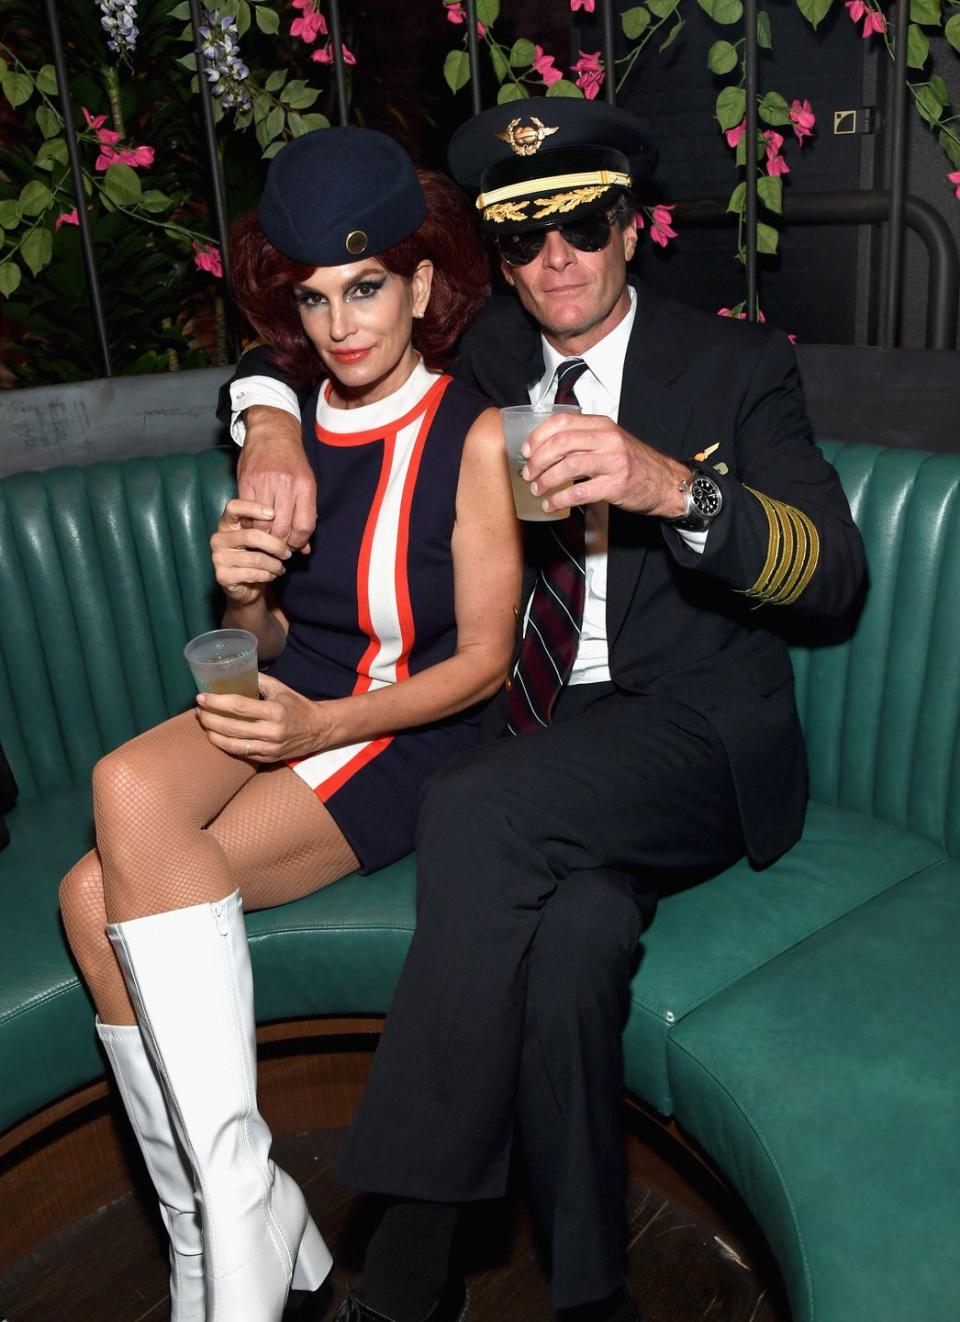 Cindy Crawford and Rande Gerber - Flight Attendant and Pilot